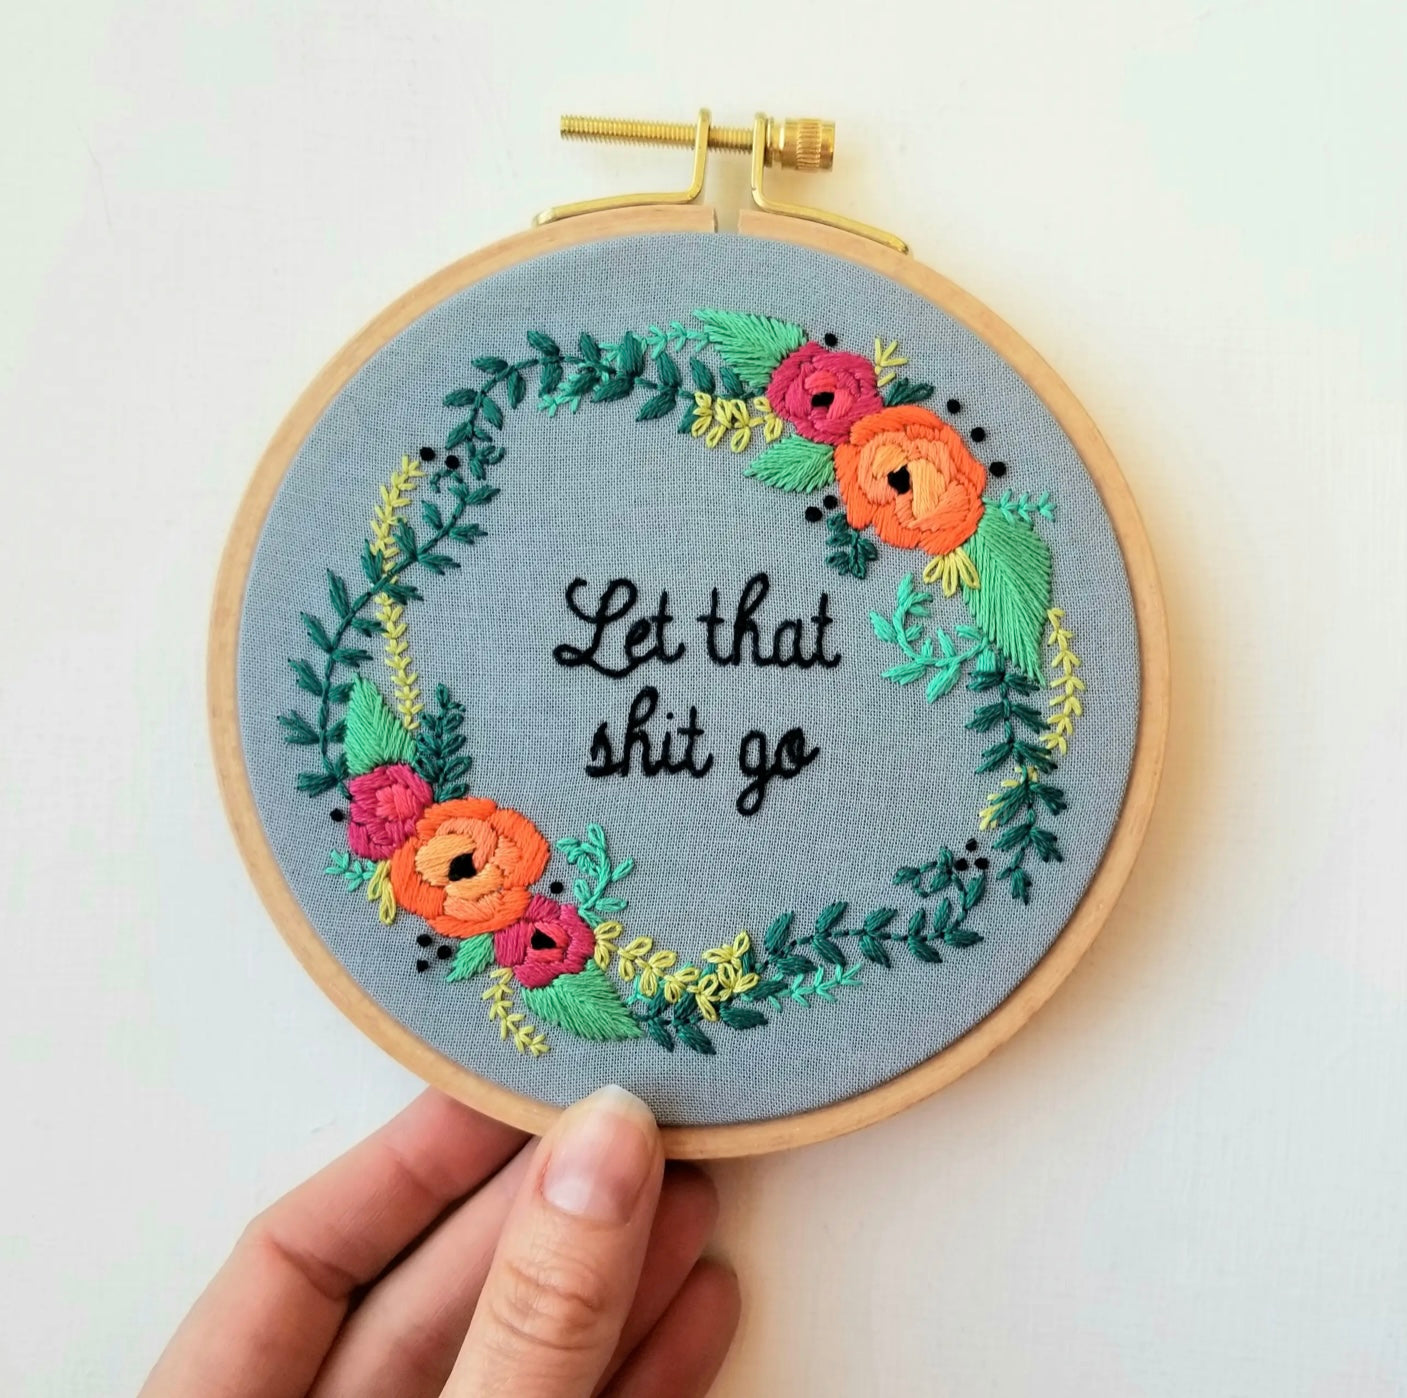 flowers and vines in a circle around words